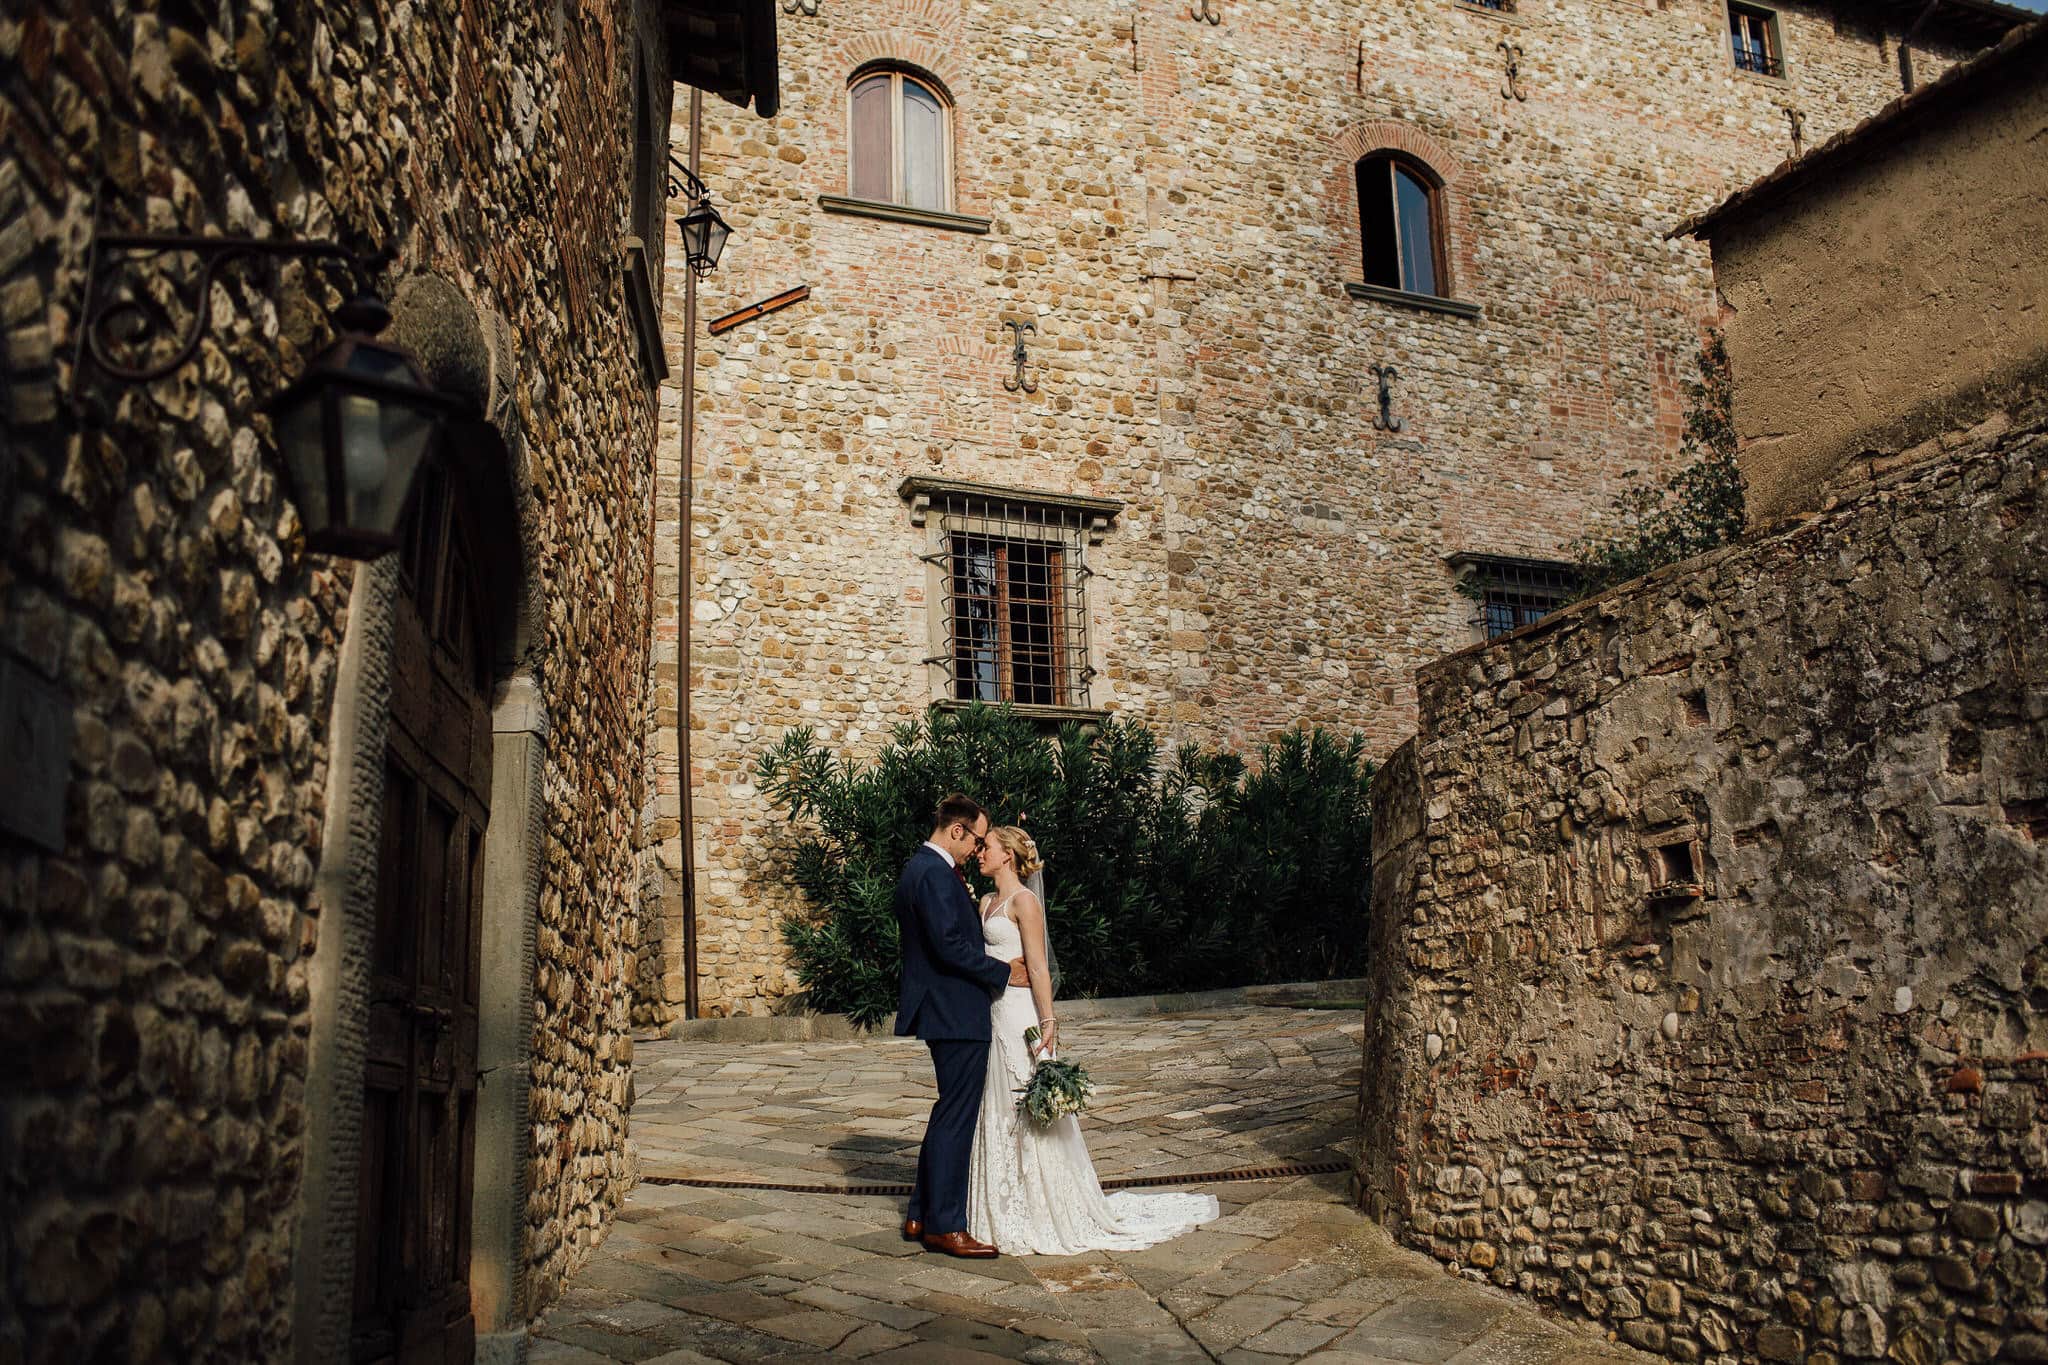 whiskow and white wedding planner in italy